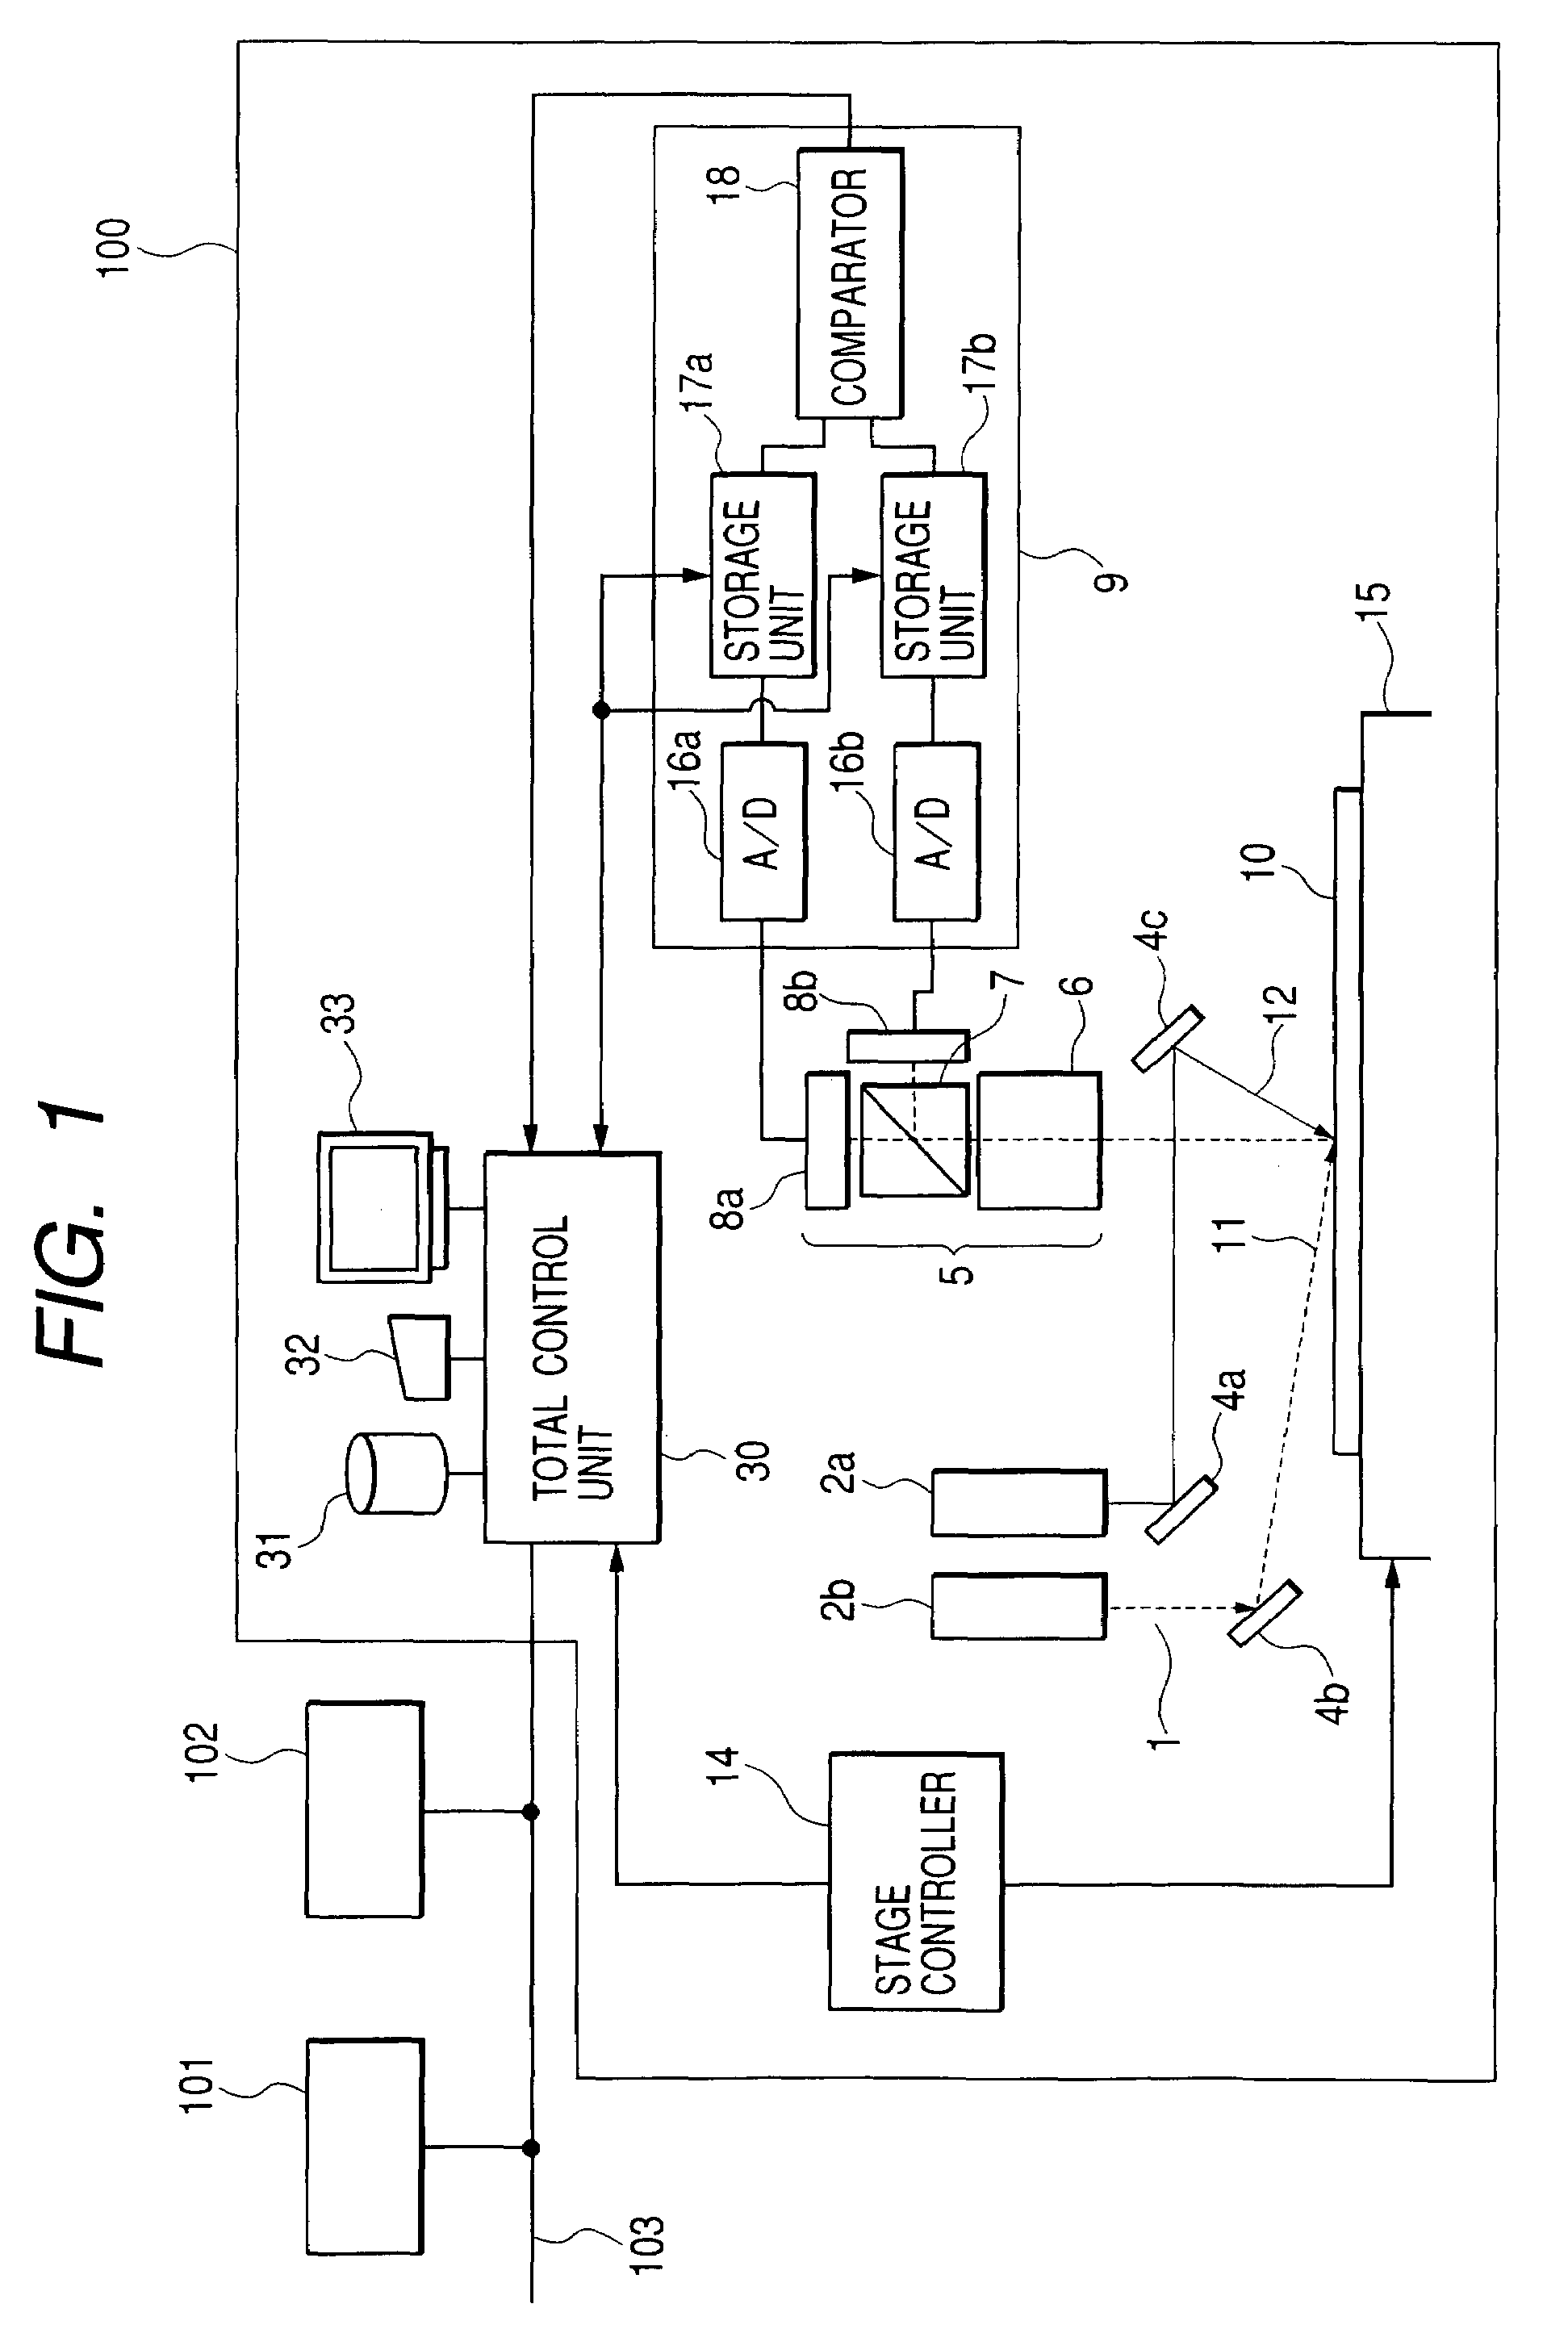 Apparatus and method for inspecting defects